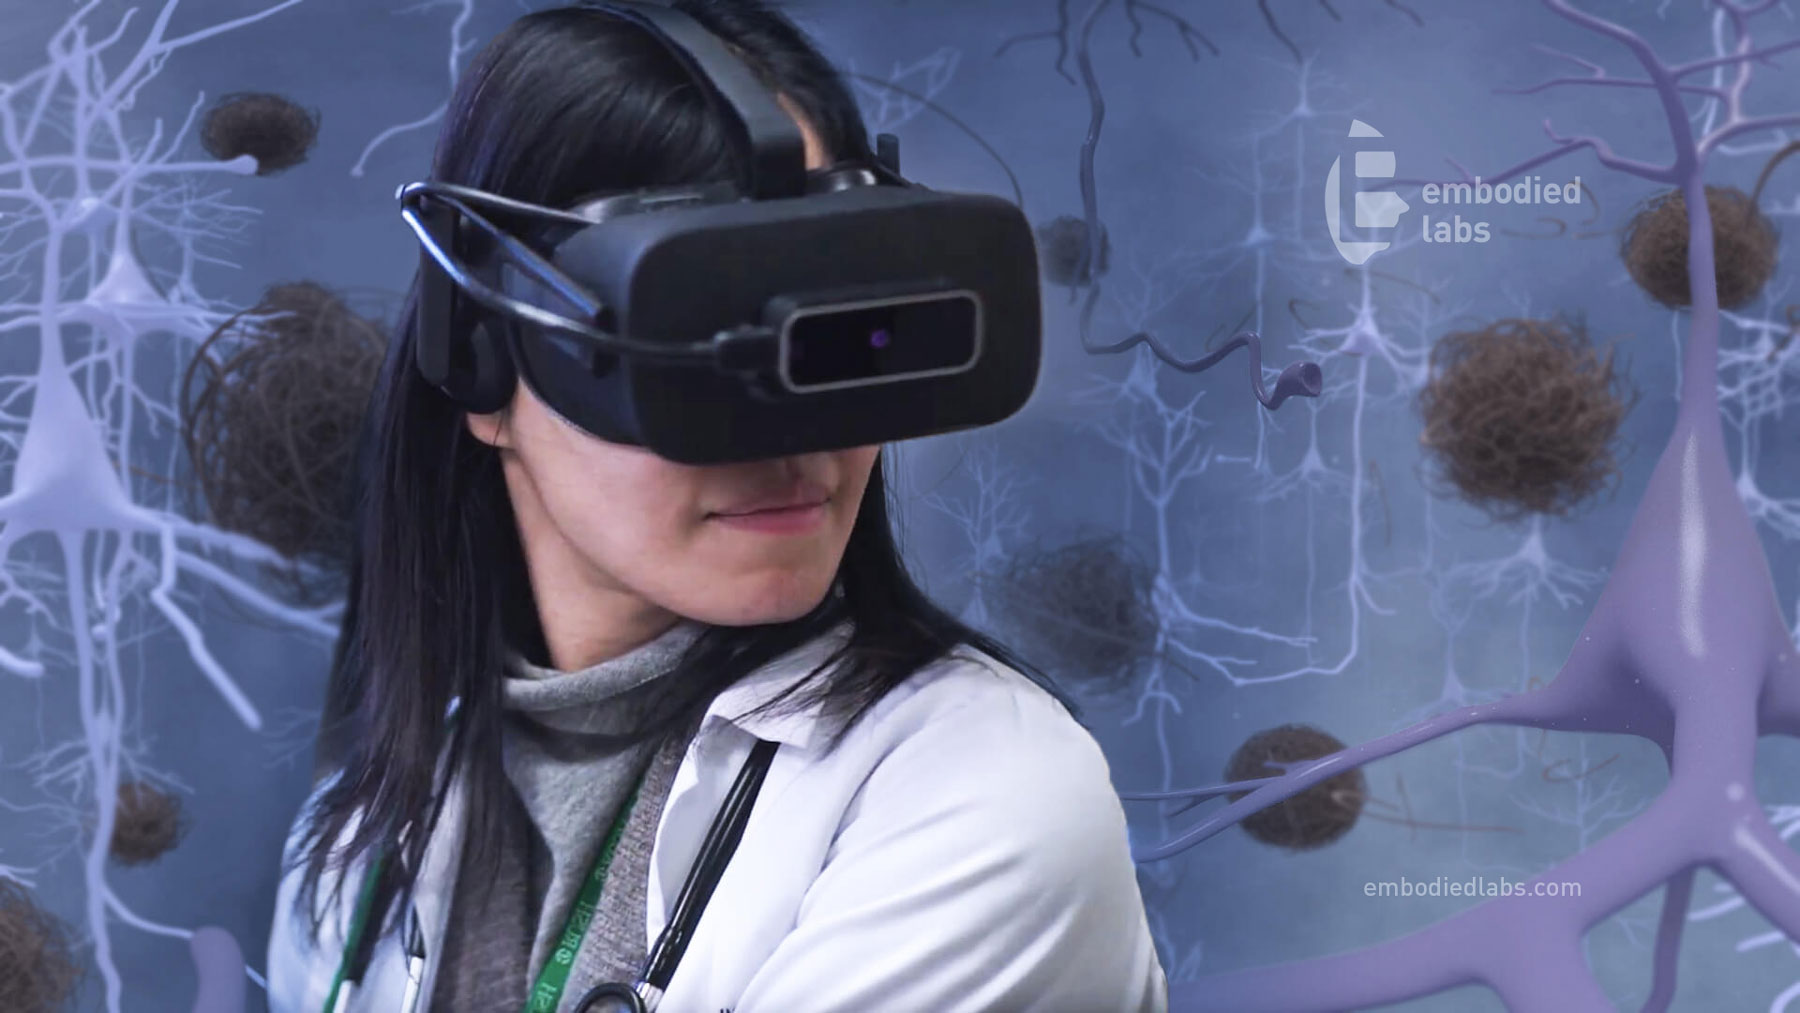 Embodied Labs provides healthcare professionals and care partners with an immersive training platform using virtual reality (VR) to spread awareness about the needs of people living with dementia and Alzheimer’s disease. 